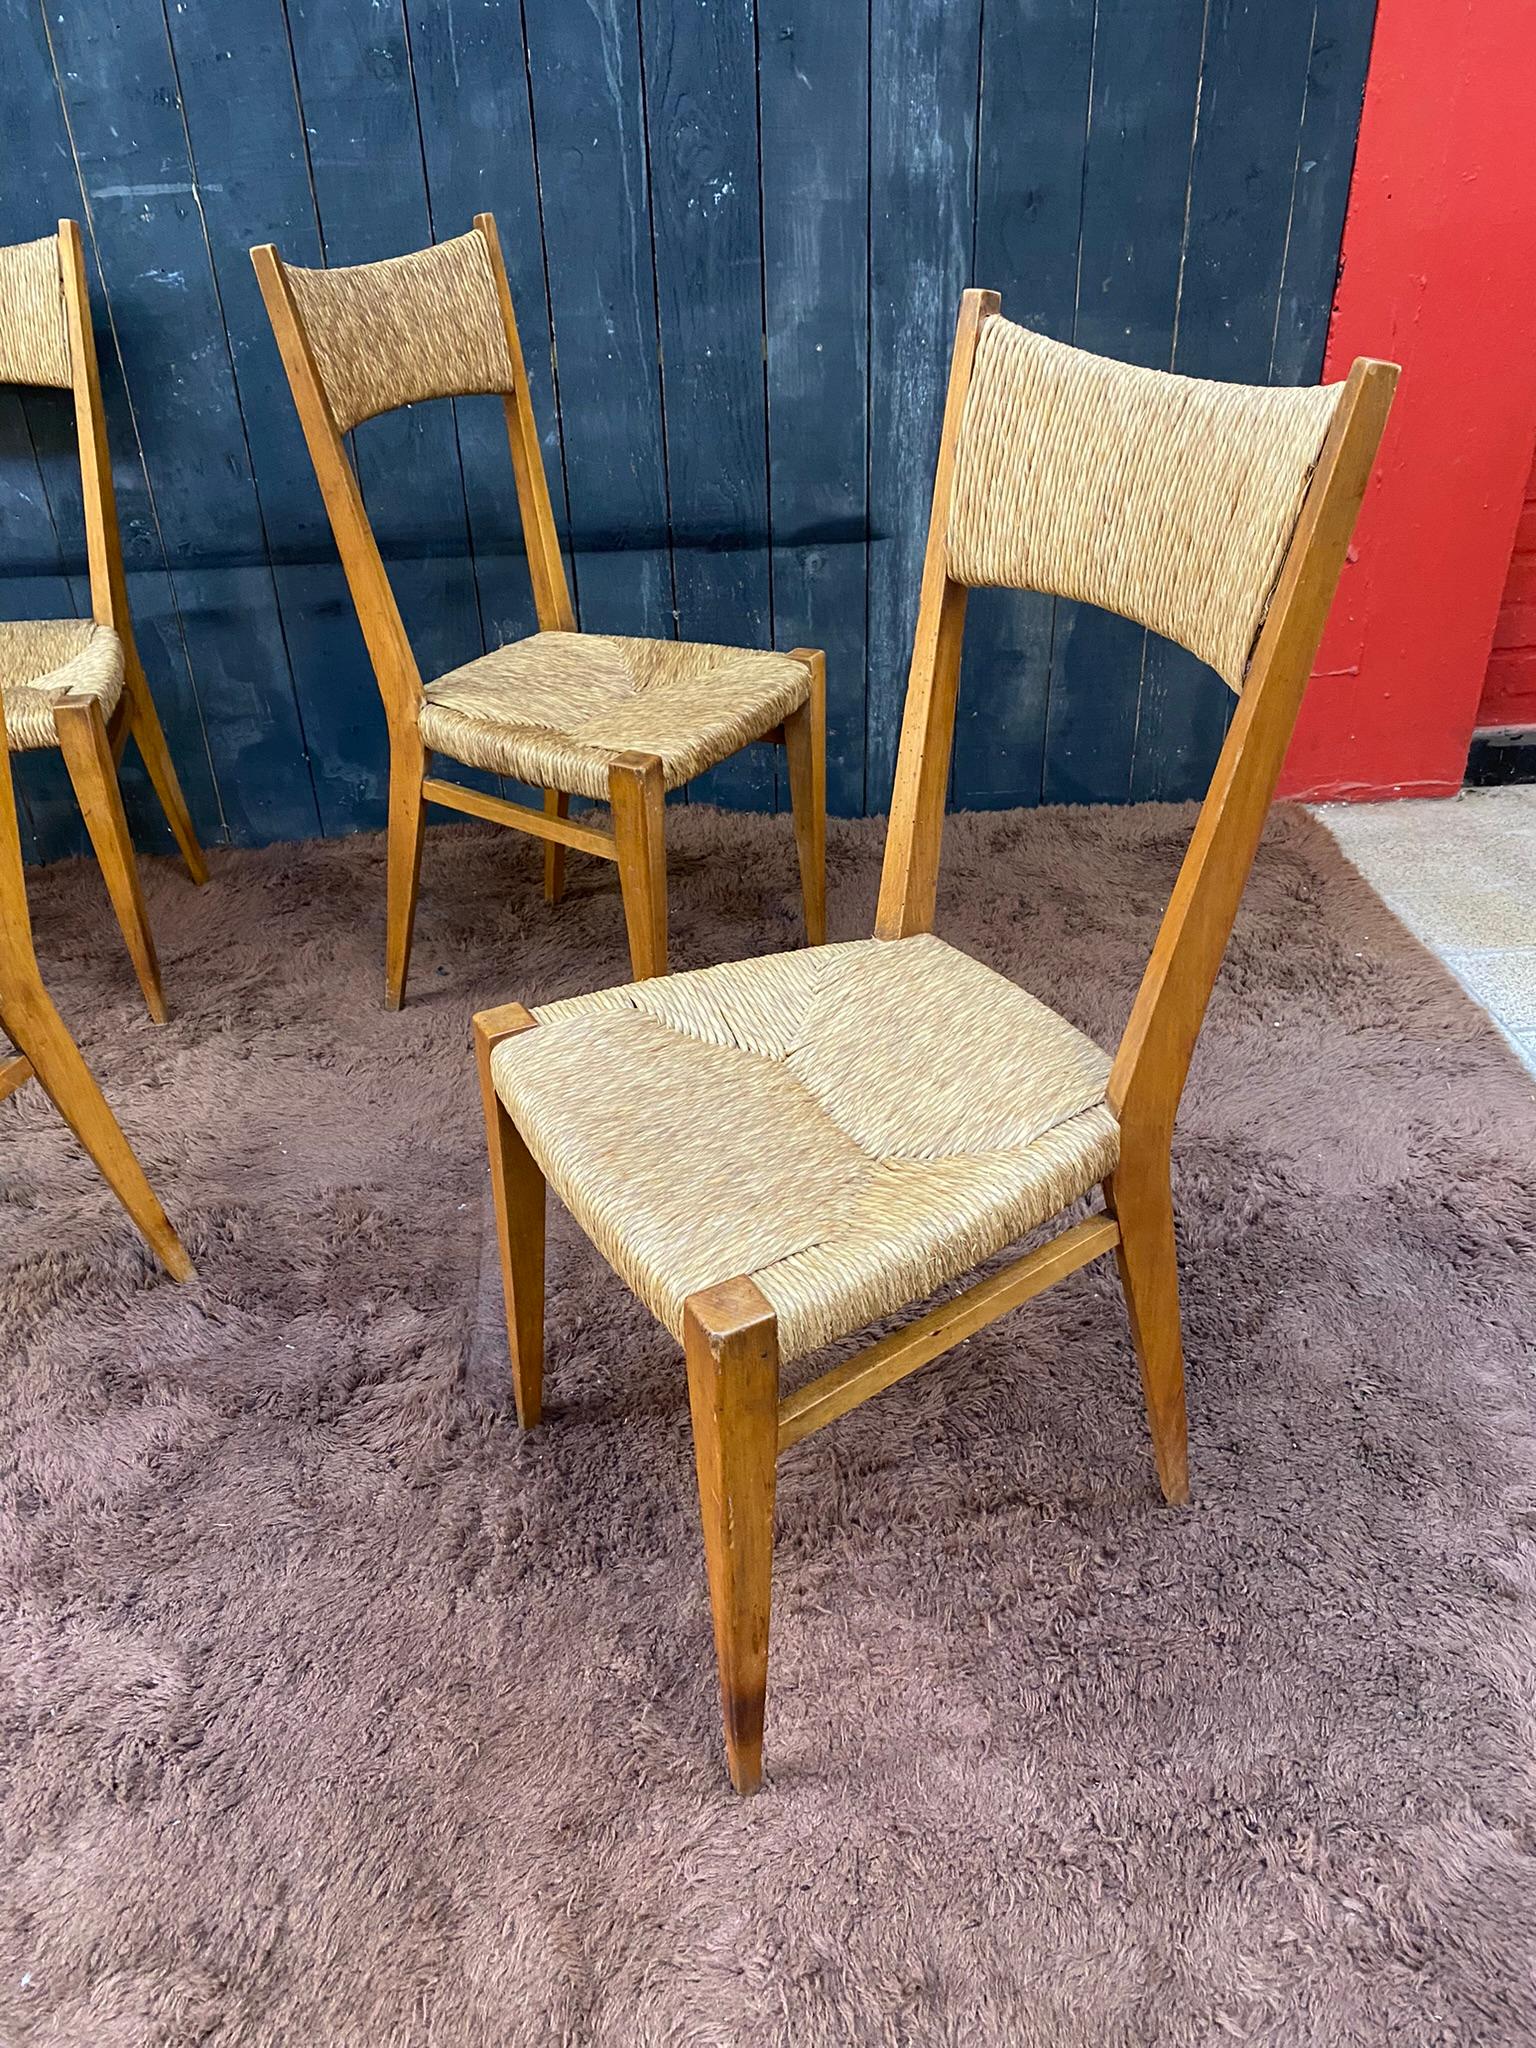 Series of 6 Elegant Oak Chairs, French Reconstruction Period, circa 1950 For Sale 2